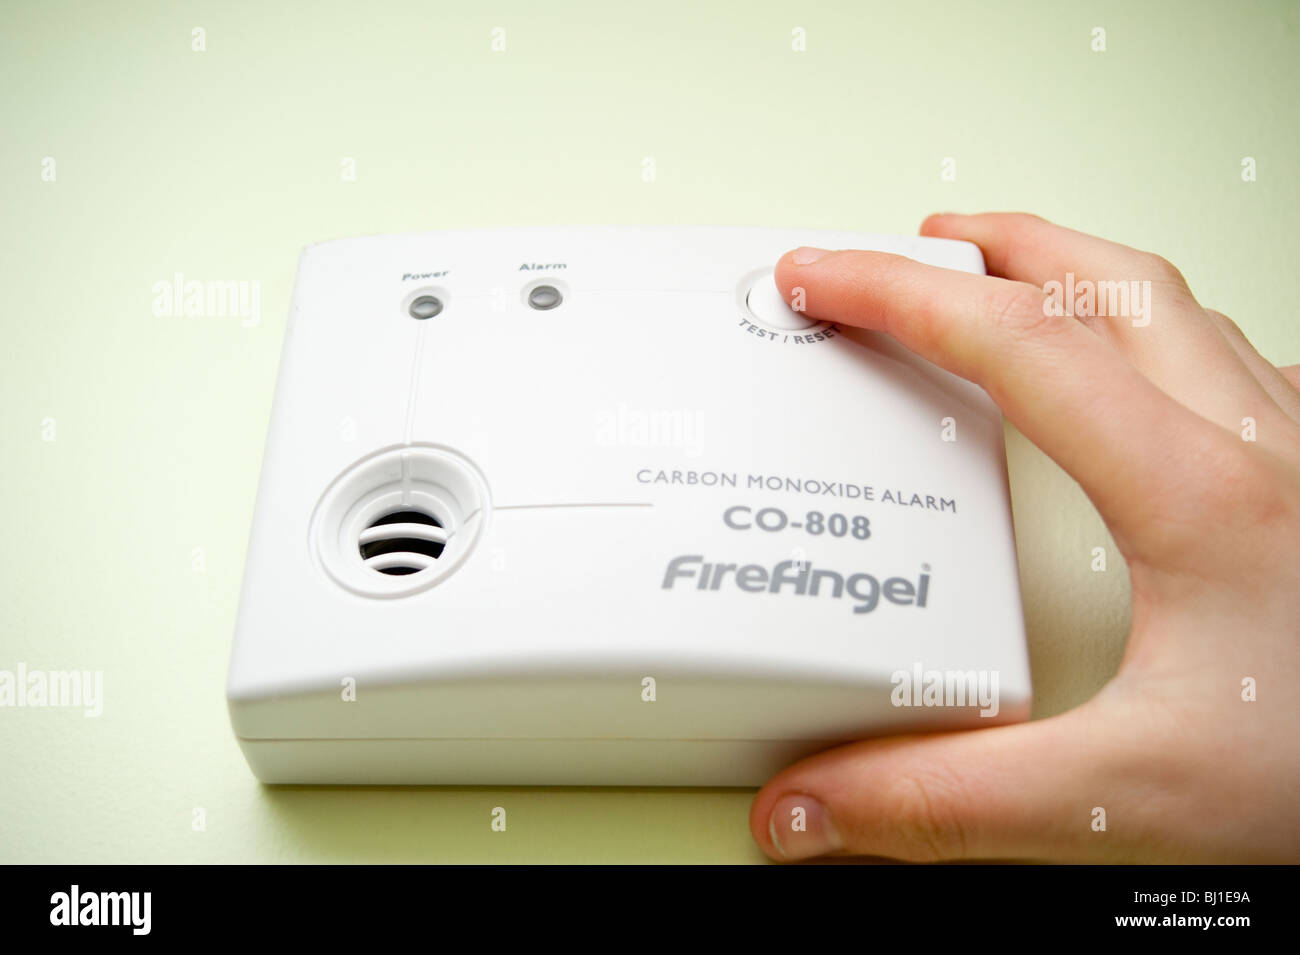 A MODEL RELEASED picture of someone testing the Fire Angel carbon monoxide alarm in the uk Stock Photo